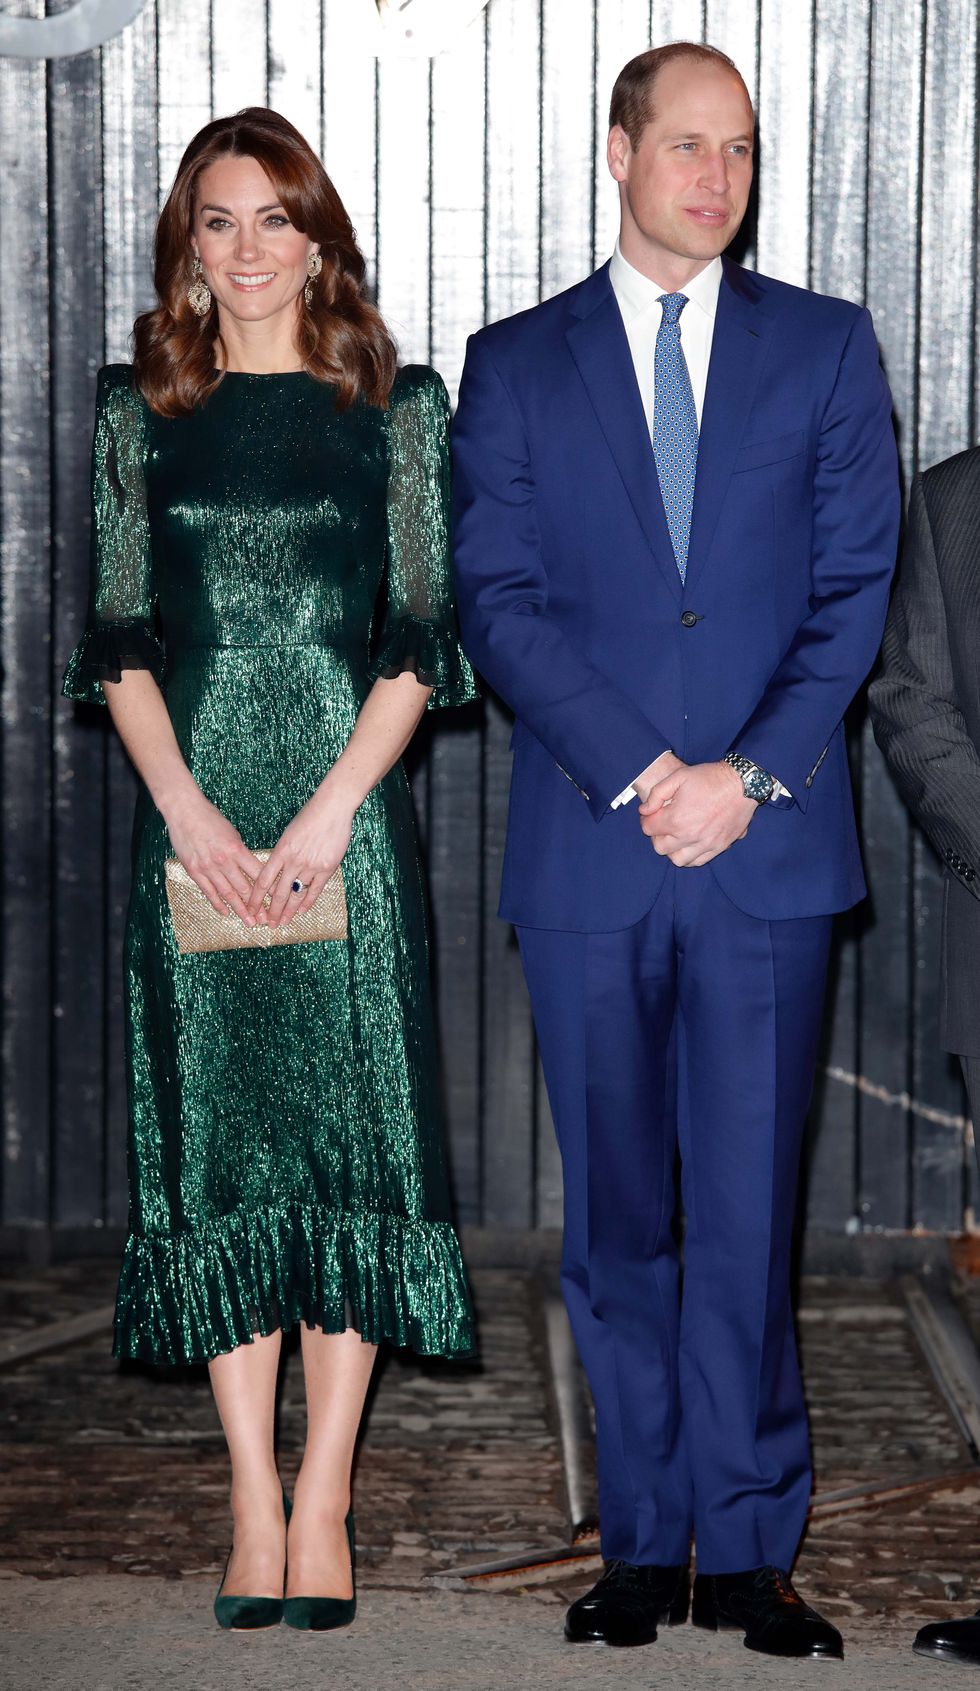 Kate Middleton shines in sparkly green dress for Ireland visit